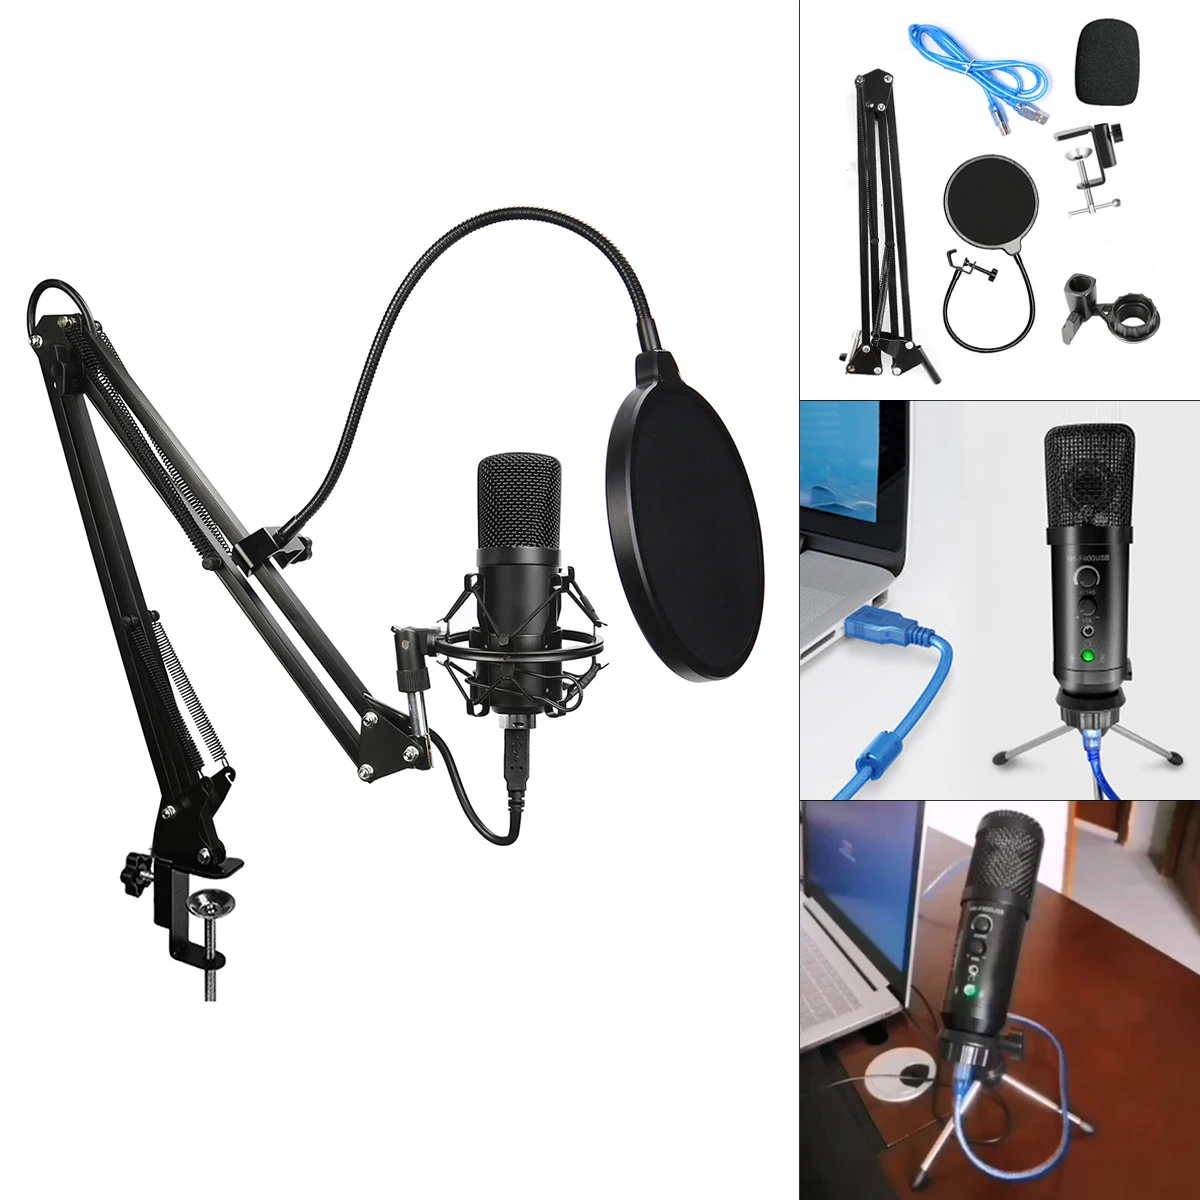 USB Condenser Microphone Set Adjustable Volume Headphone Monitoring Reverberation Noise Reduction No Sound Card Required